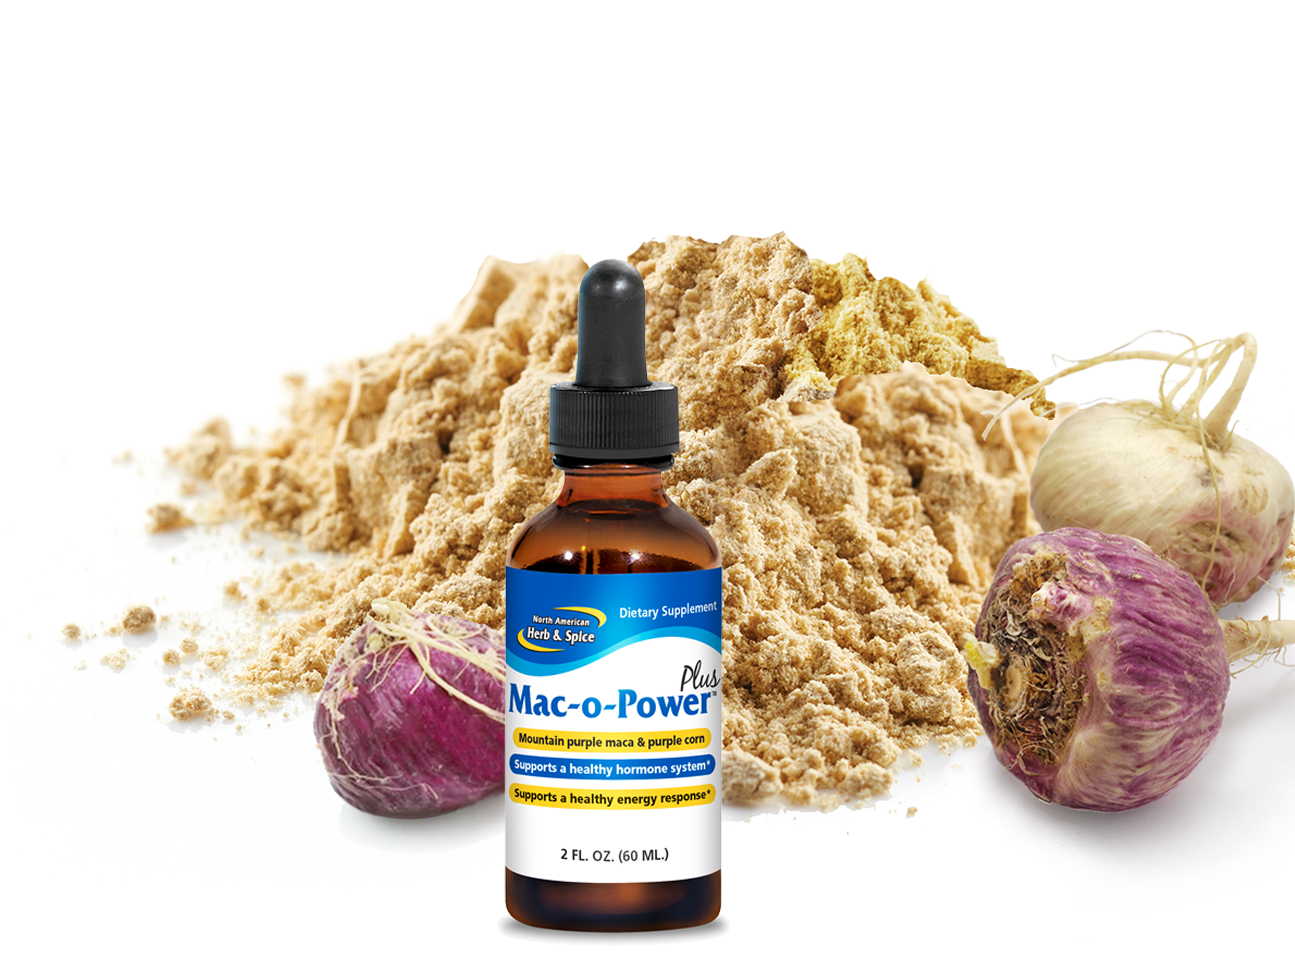 Maca ingredient with Mac-o-Power product